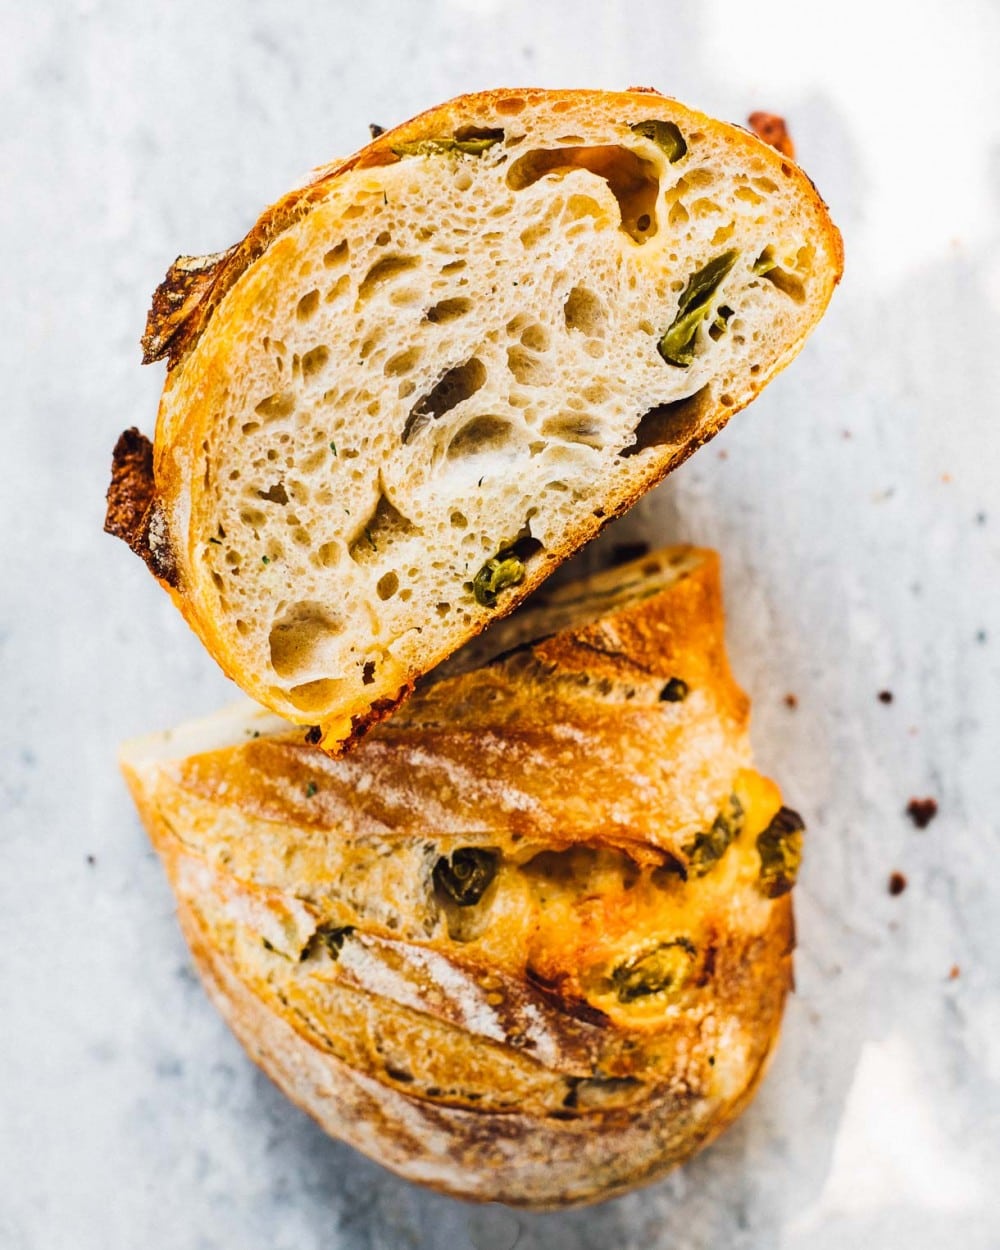 jalapeno sourdough cheese bread, cut in half with crumb showing